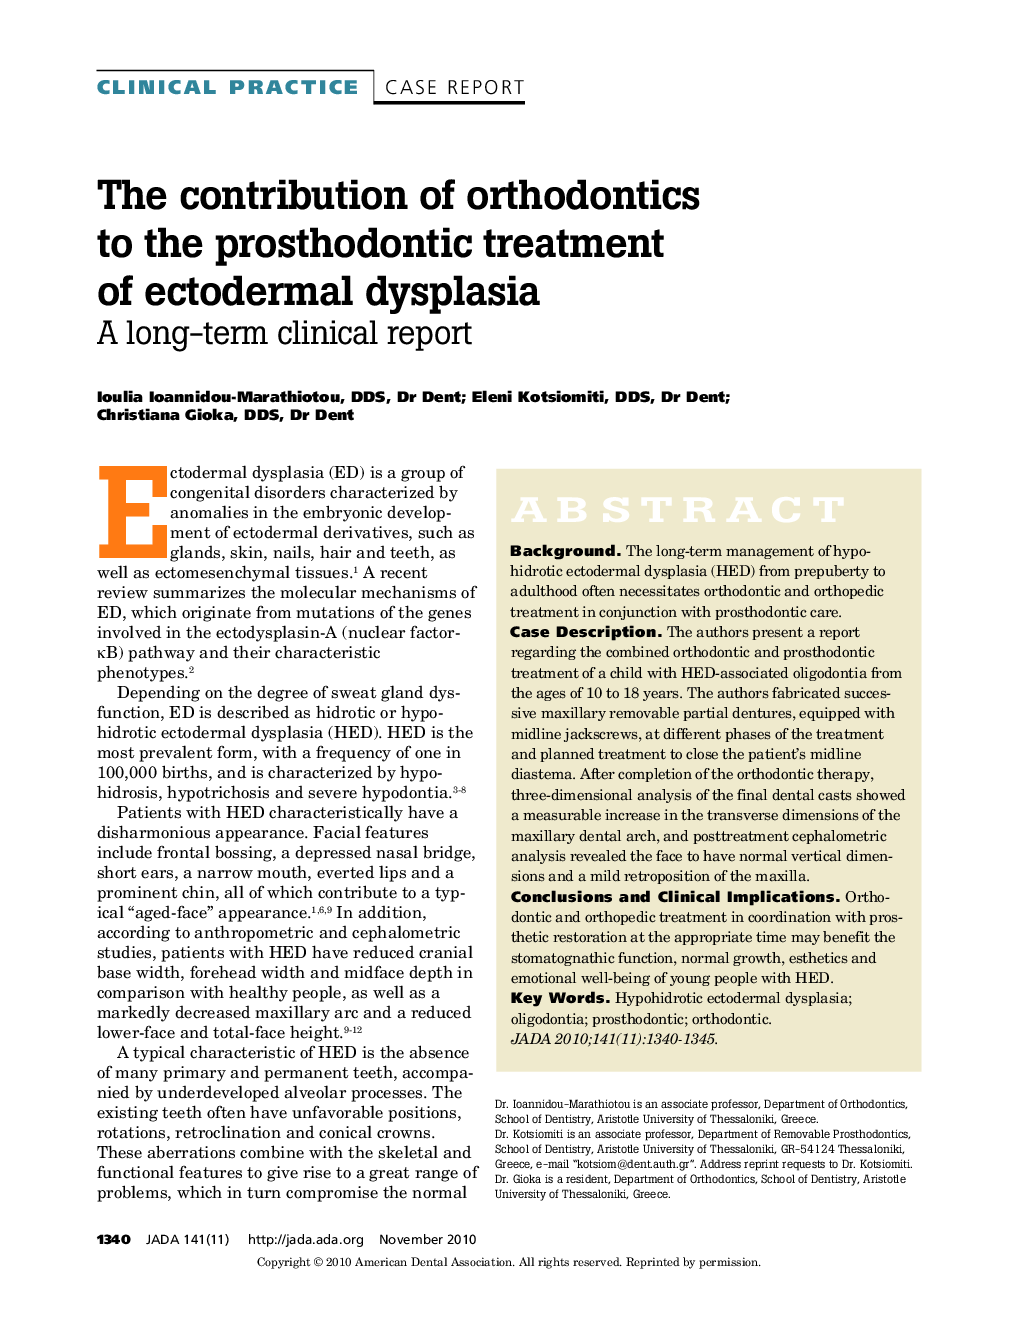 The Contribution of Orthodontics to the Prosthodontic Treatment of Ectodermal Dysplasia : A long-term clinical report